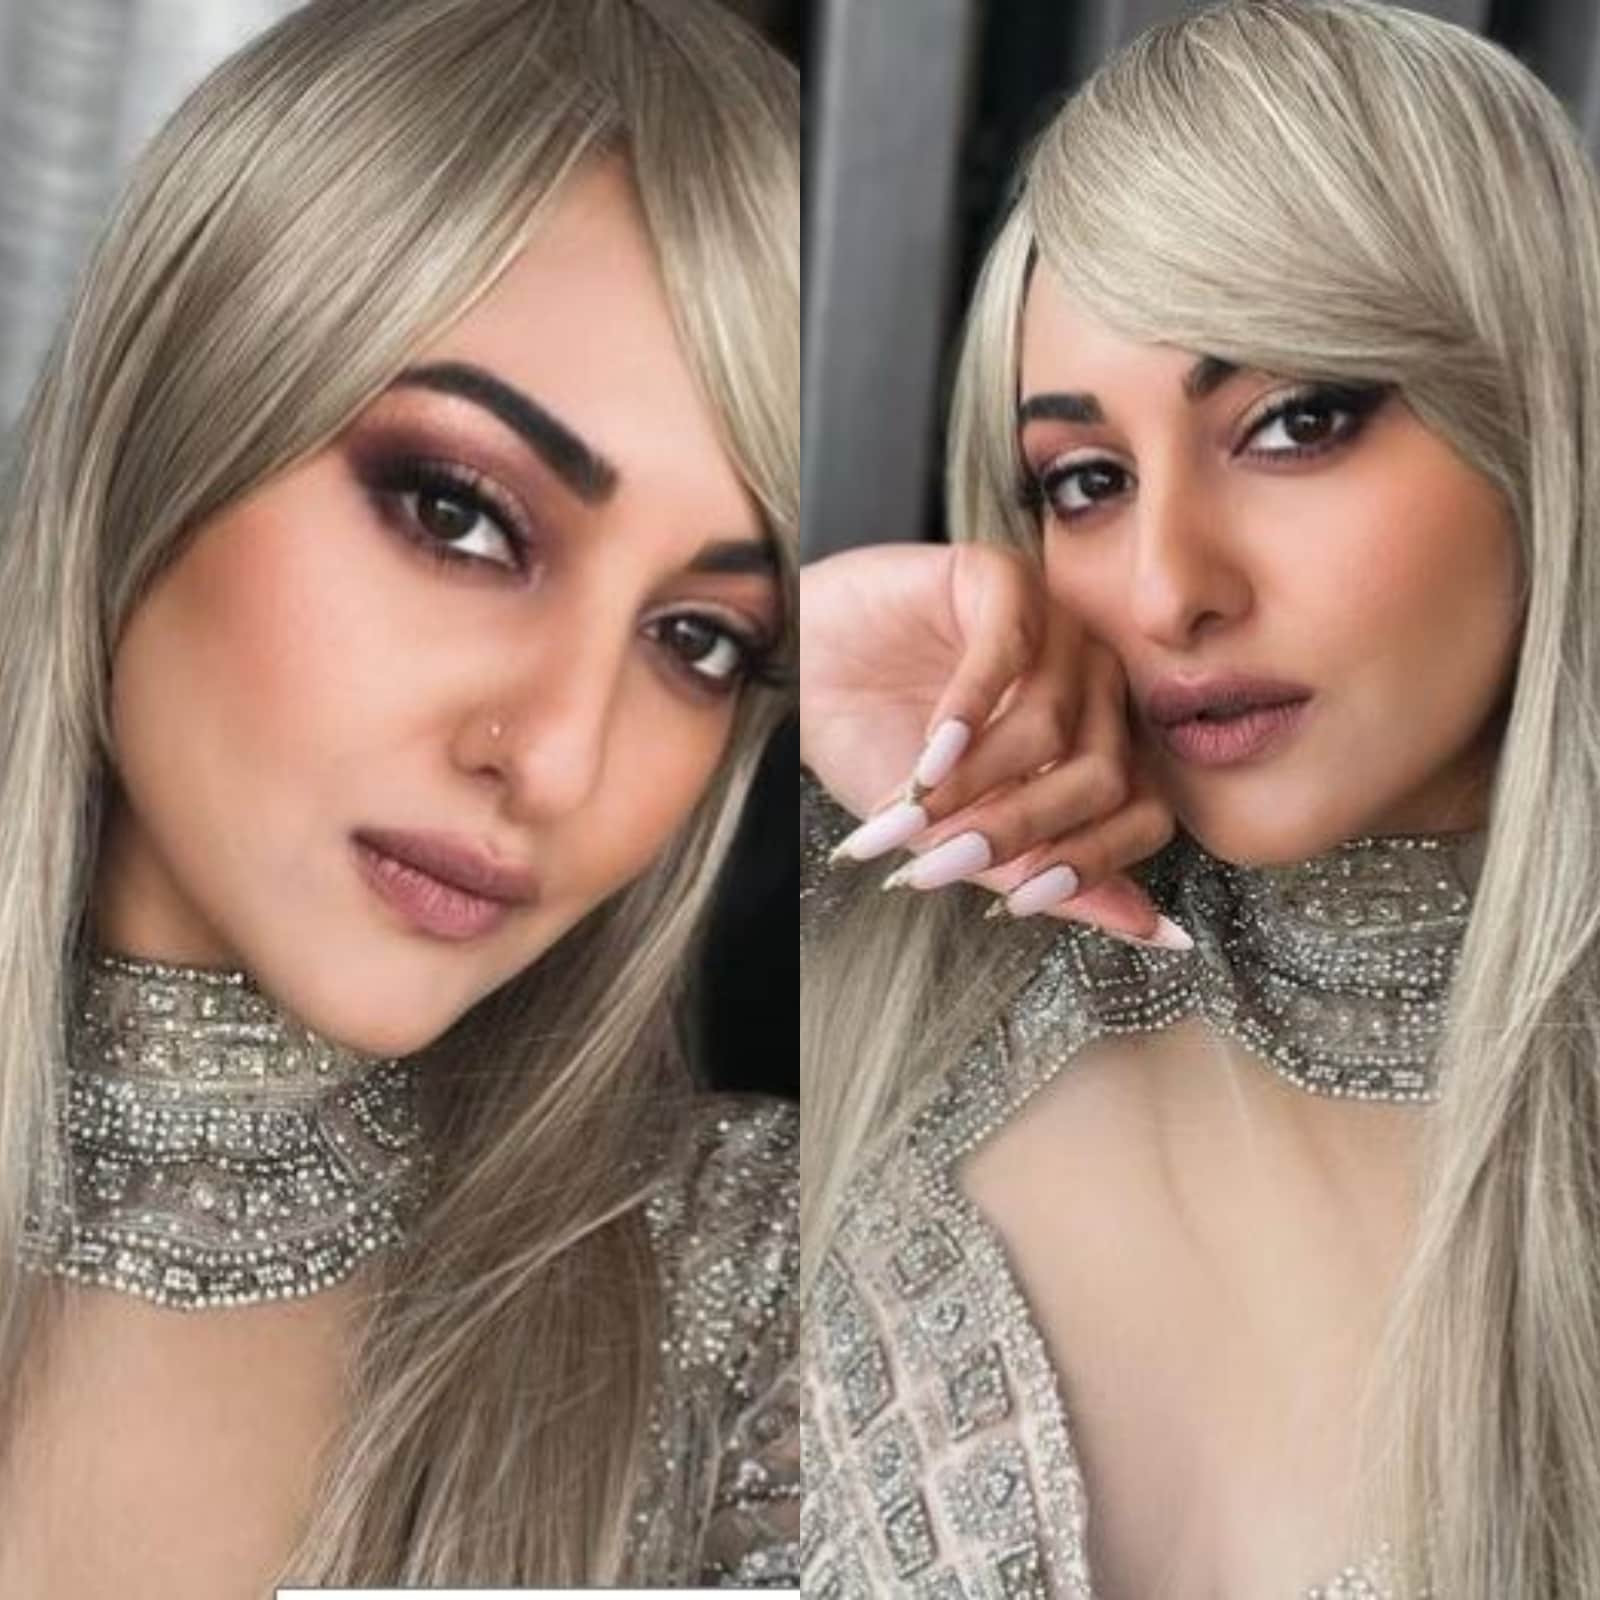 Sonaxi Sex - Sonakshi Sinha Flaunts Her Look in Blonde Hair in Latest Instagram Post,  See Pics - News18